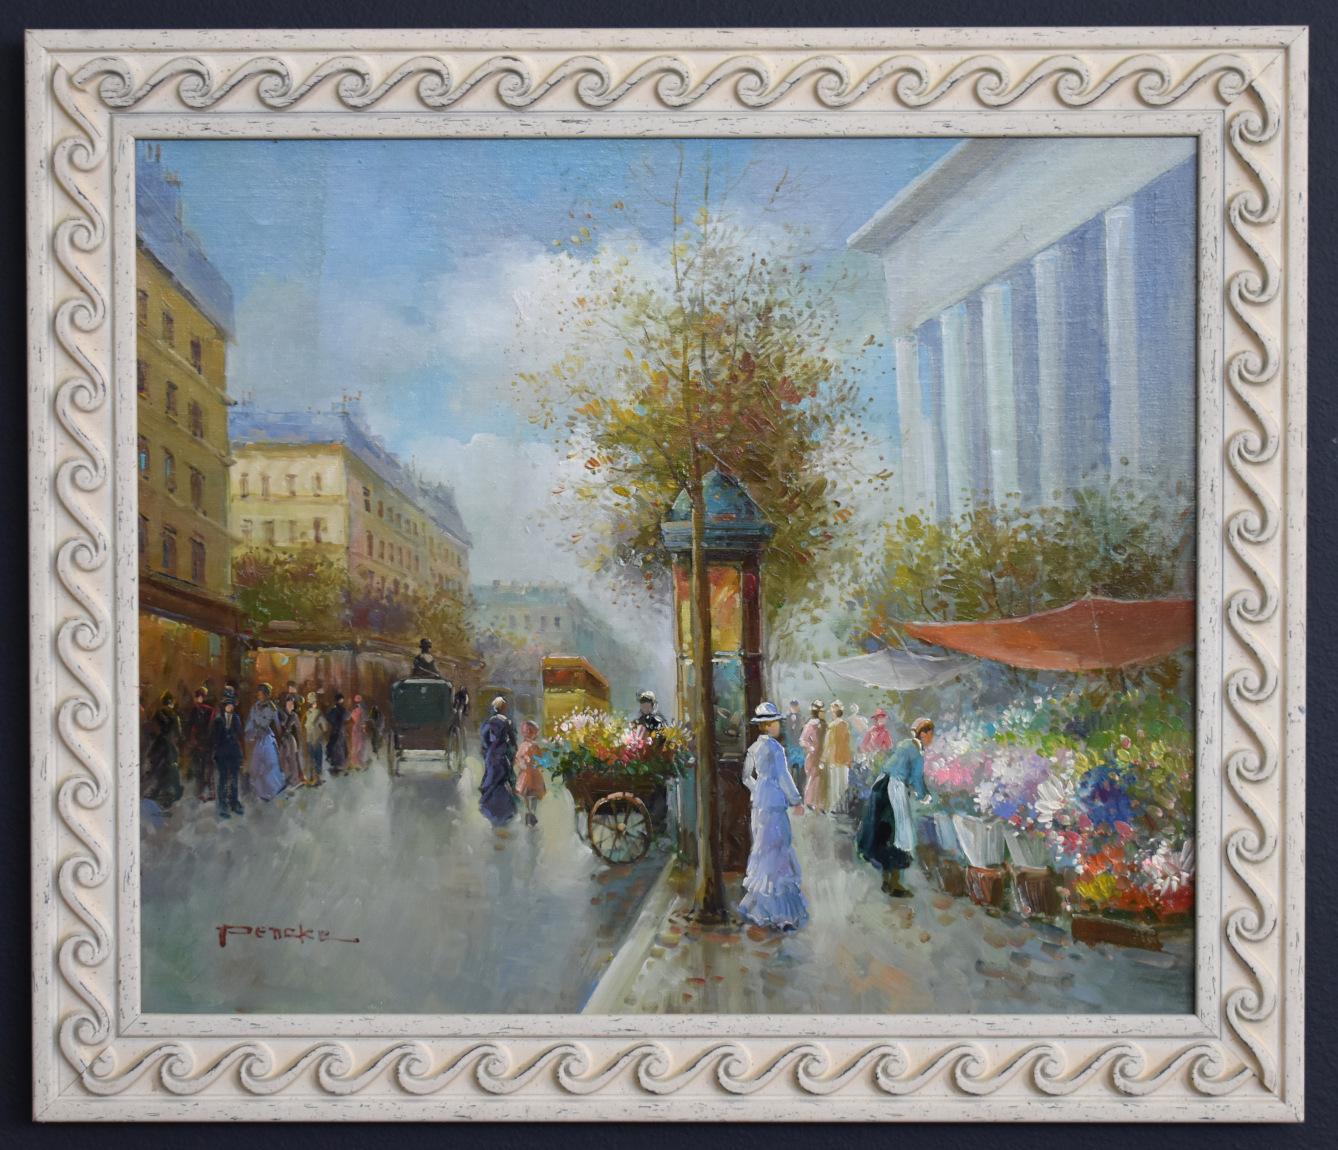 FRENCH STREET SCENE POSSIBLY PARIS FLOWER VENDORS - Painting by T.E. Pencke